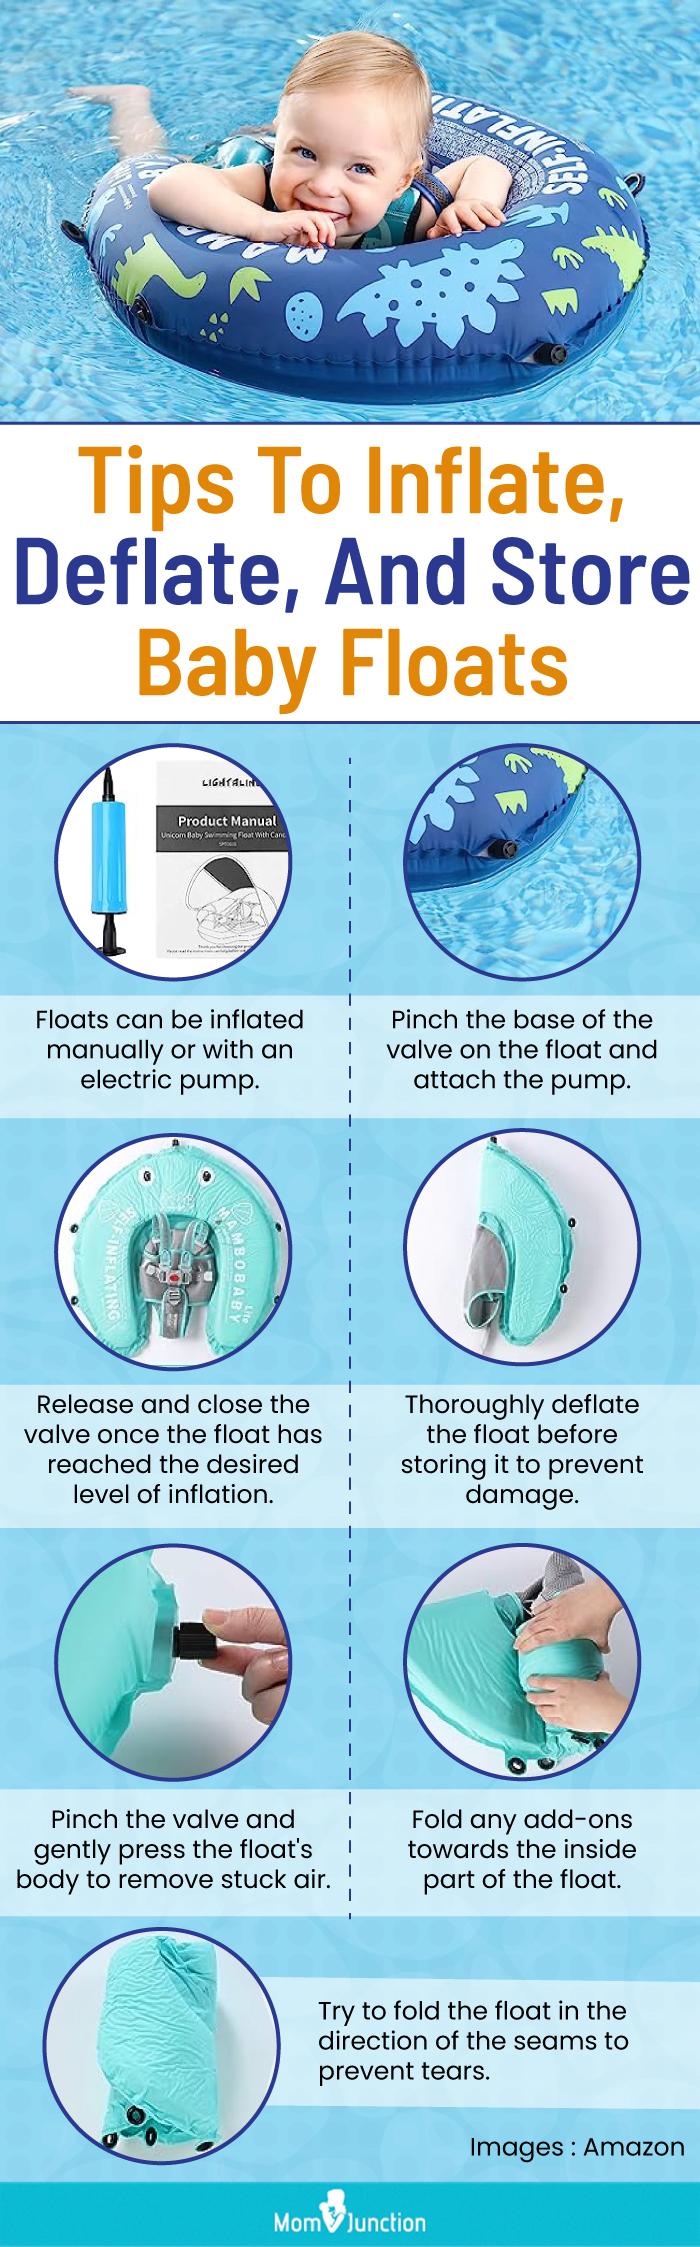 Tips To Inflate, Deflate, And Store Baby Floats (infographic)